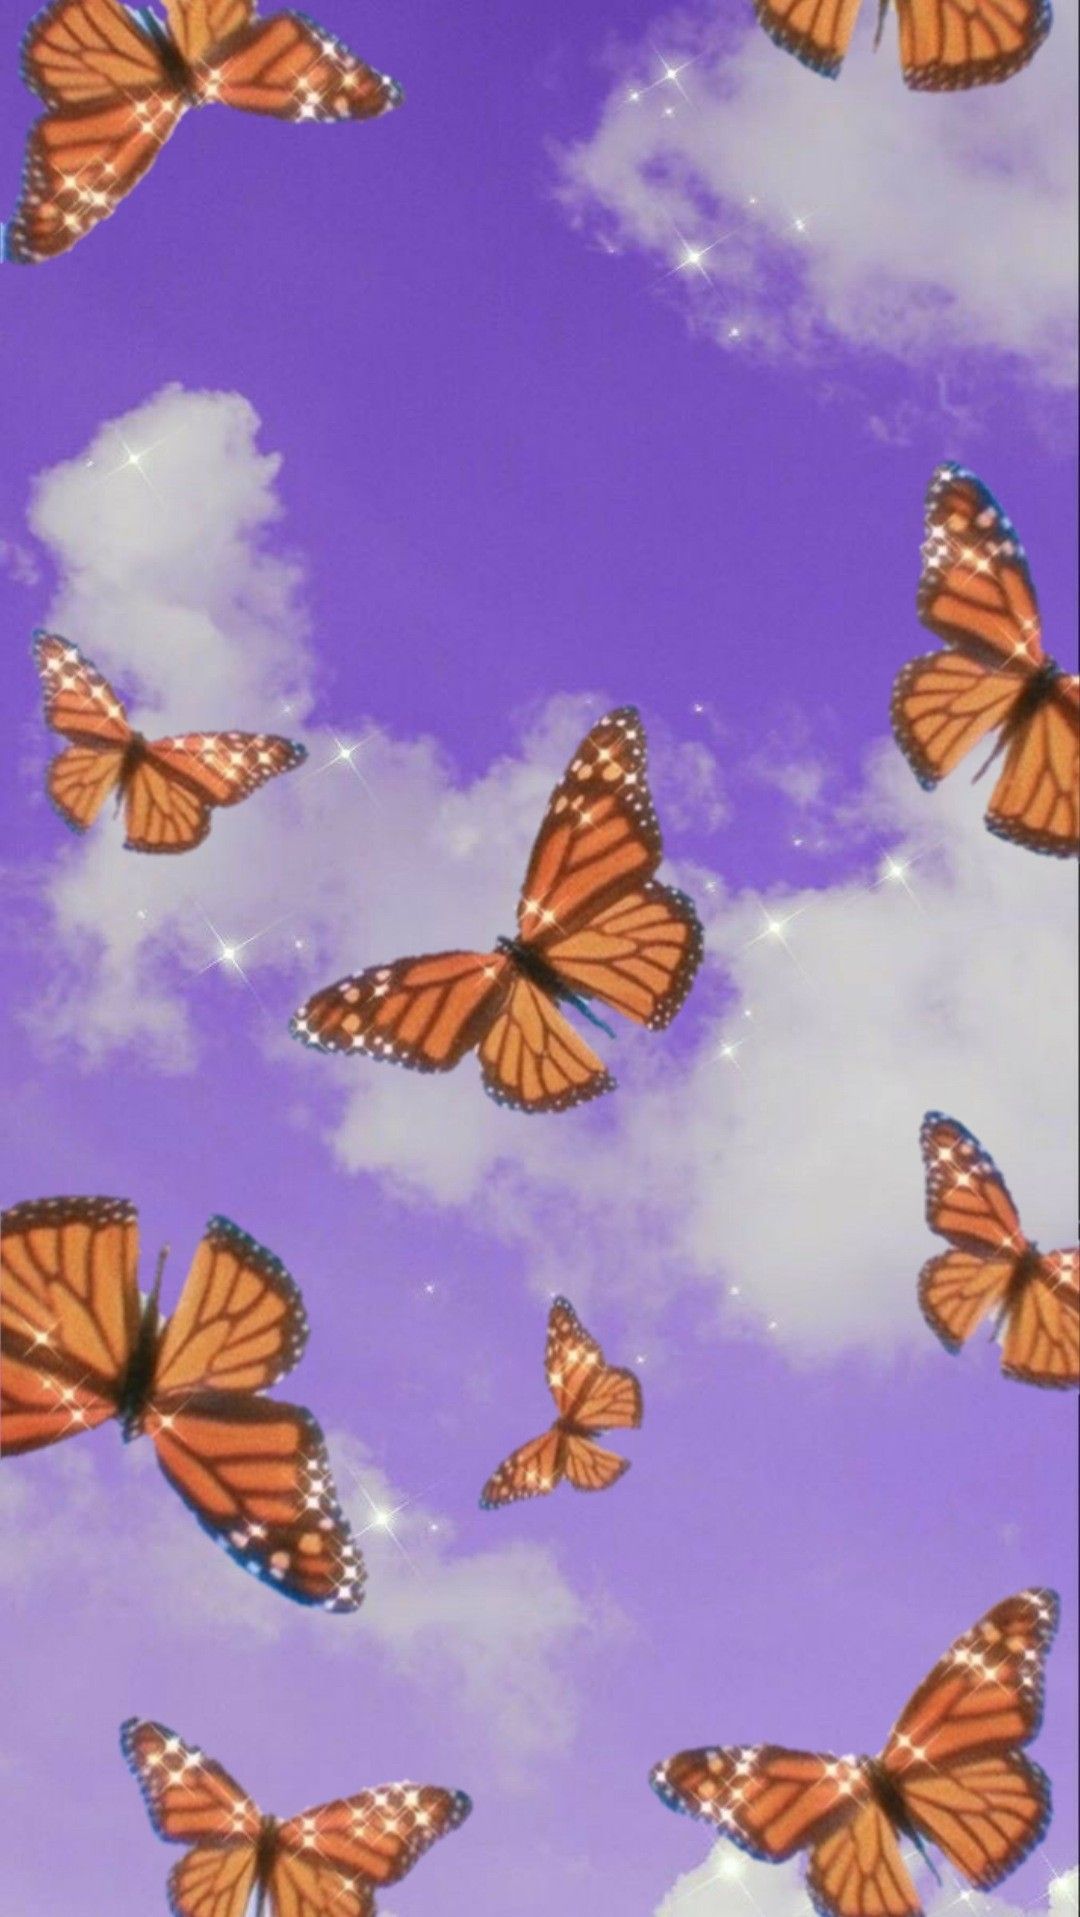 Cute Butterfly Aesthetic Wallpapers - Wallpaper Cave